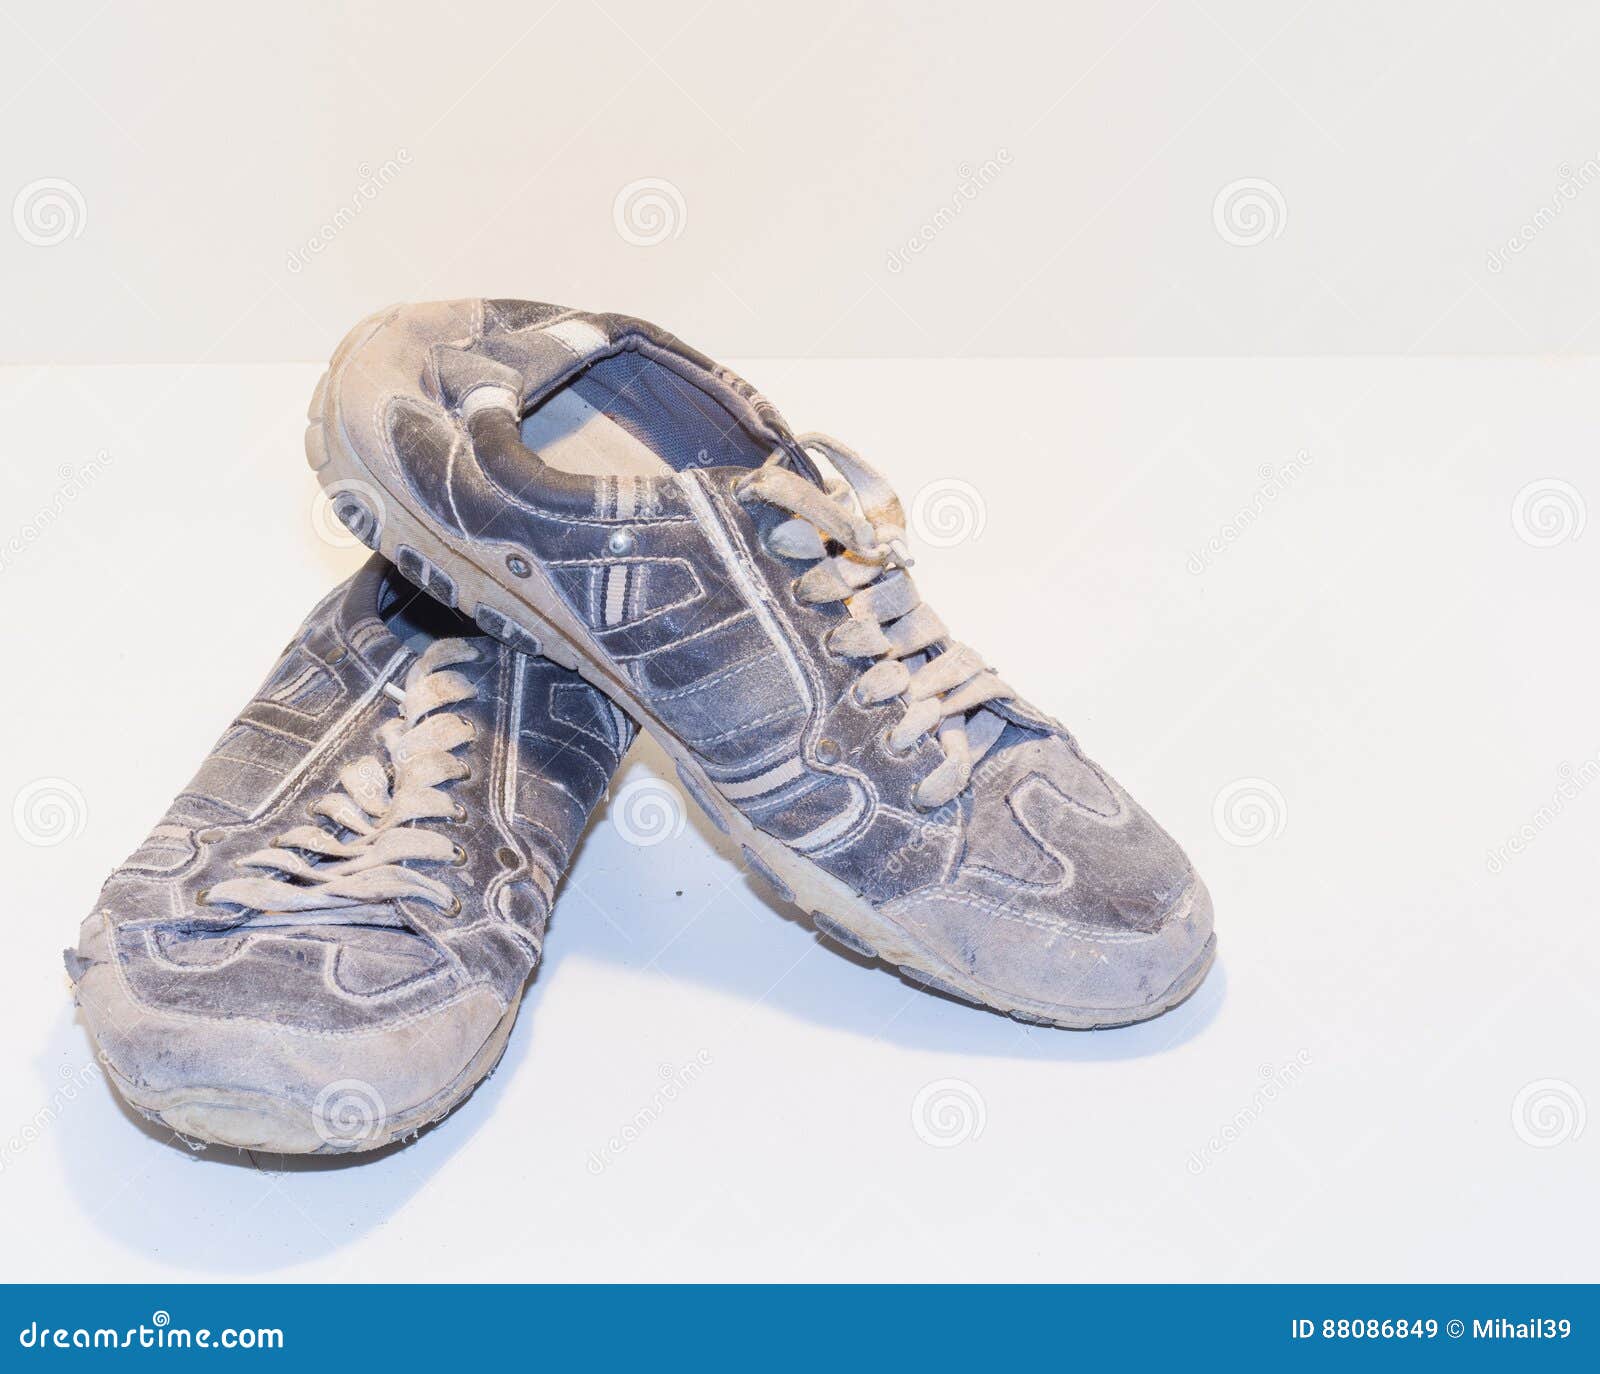 Very Old Running Shoes with Laces on a Light Background. Stock Image ...